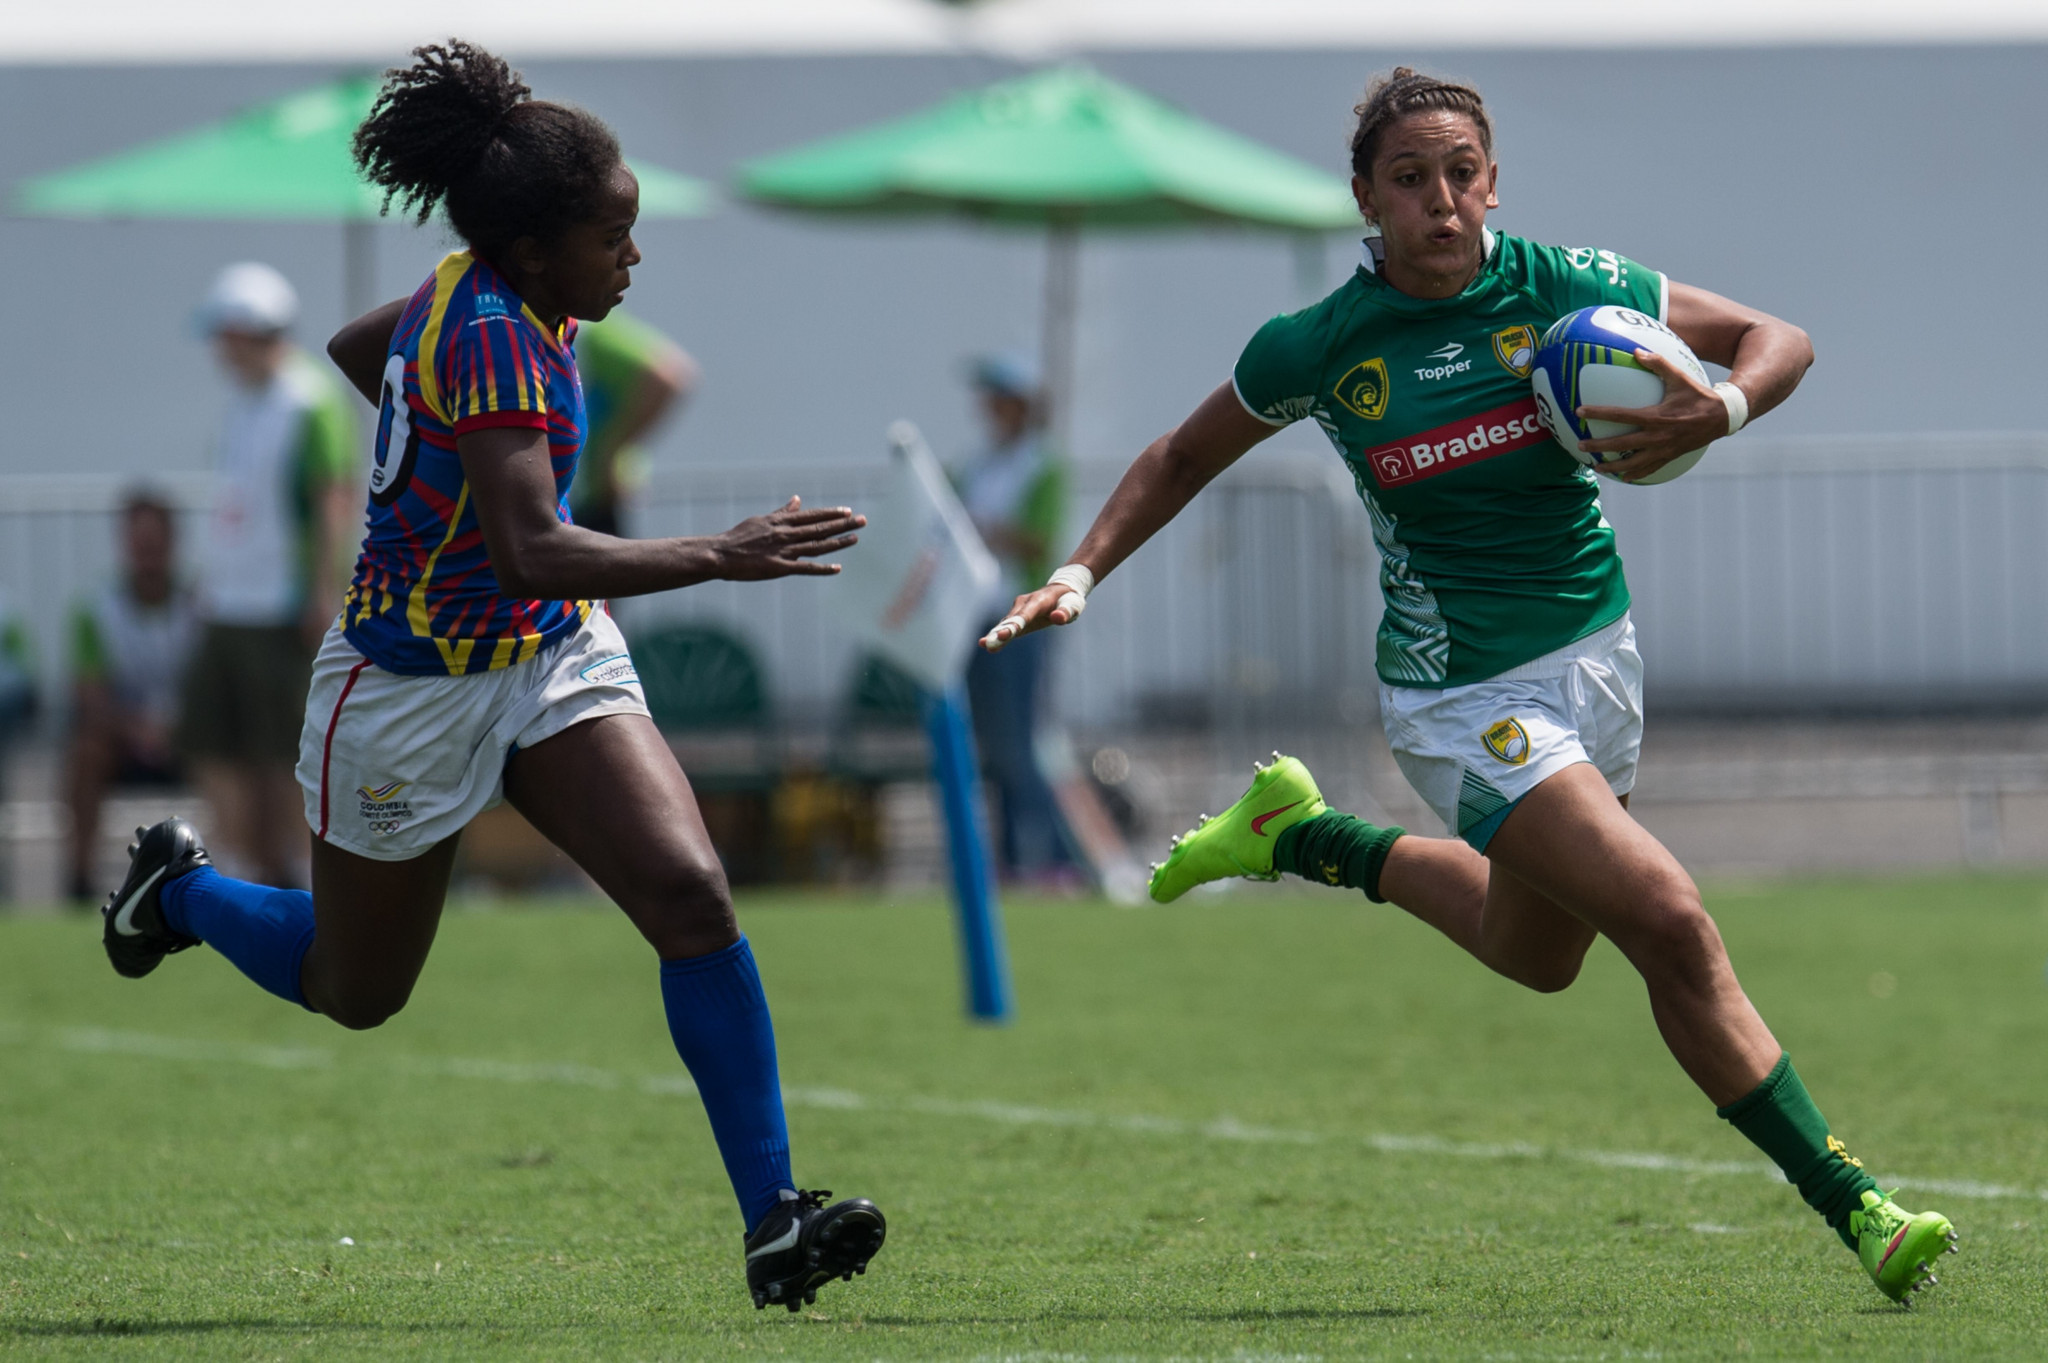 Brazil finished ninth in their home 2016 Games at rugby sevens' debut tournament ©Getty Images